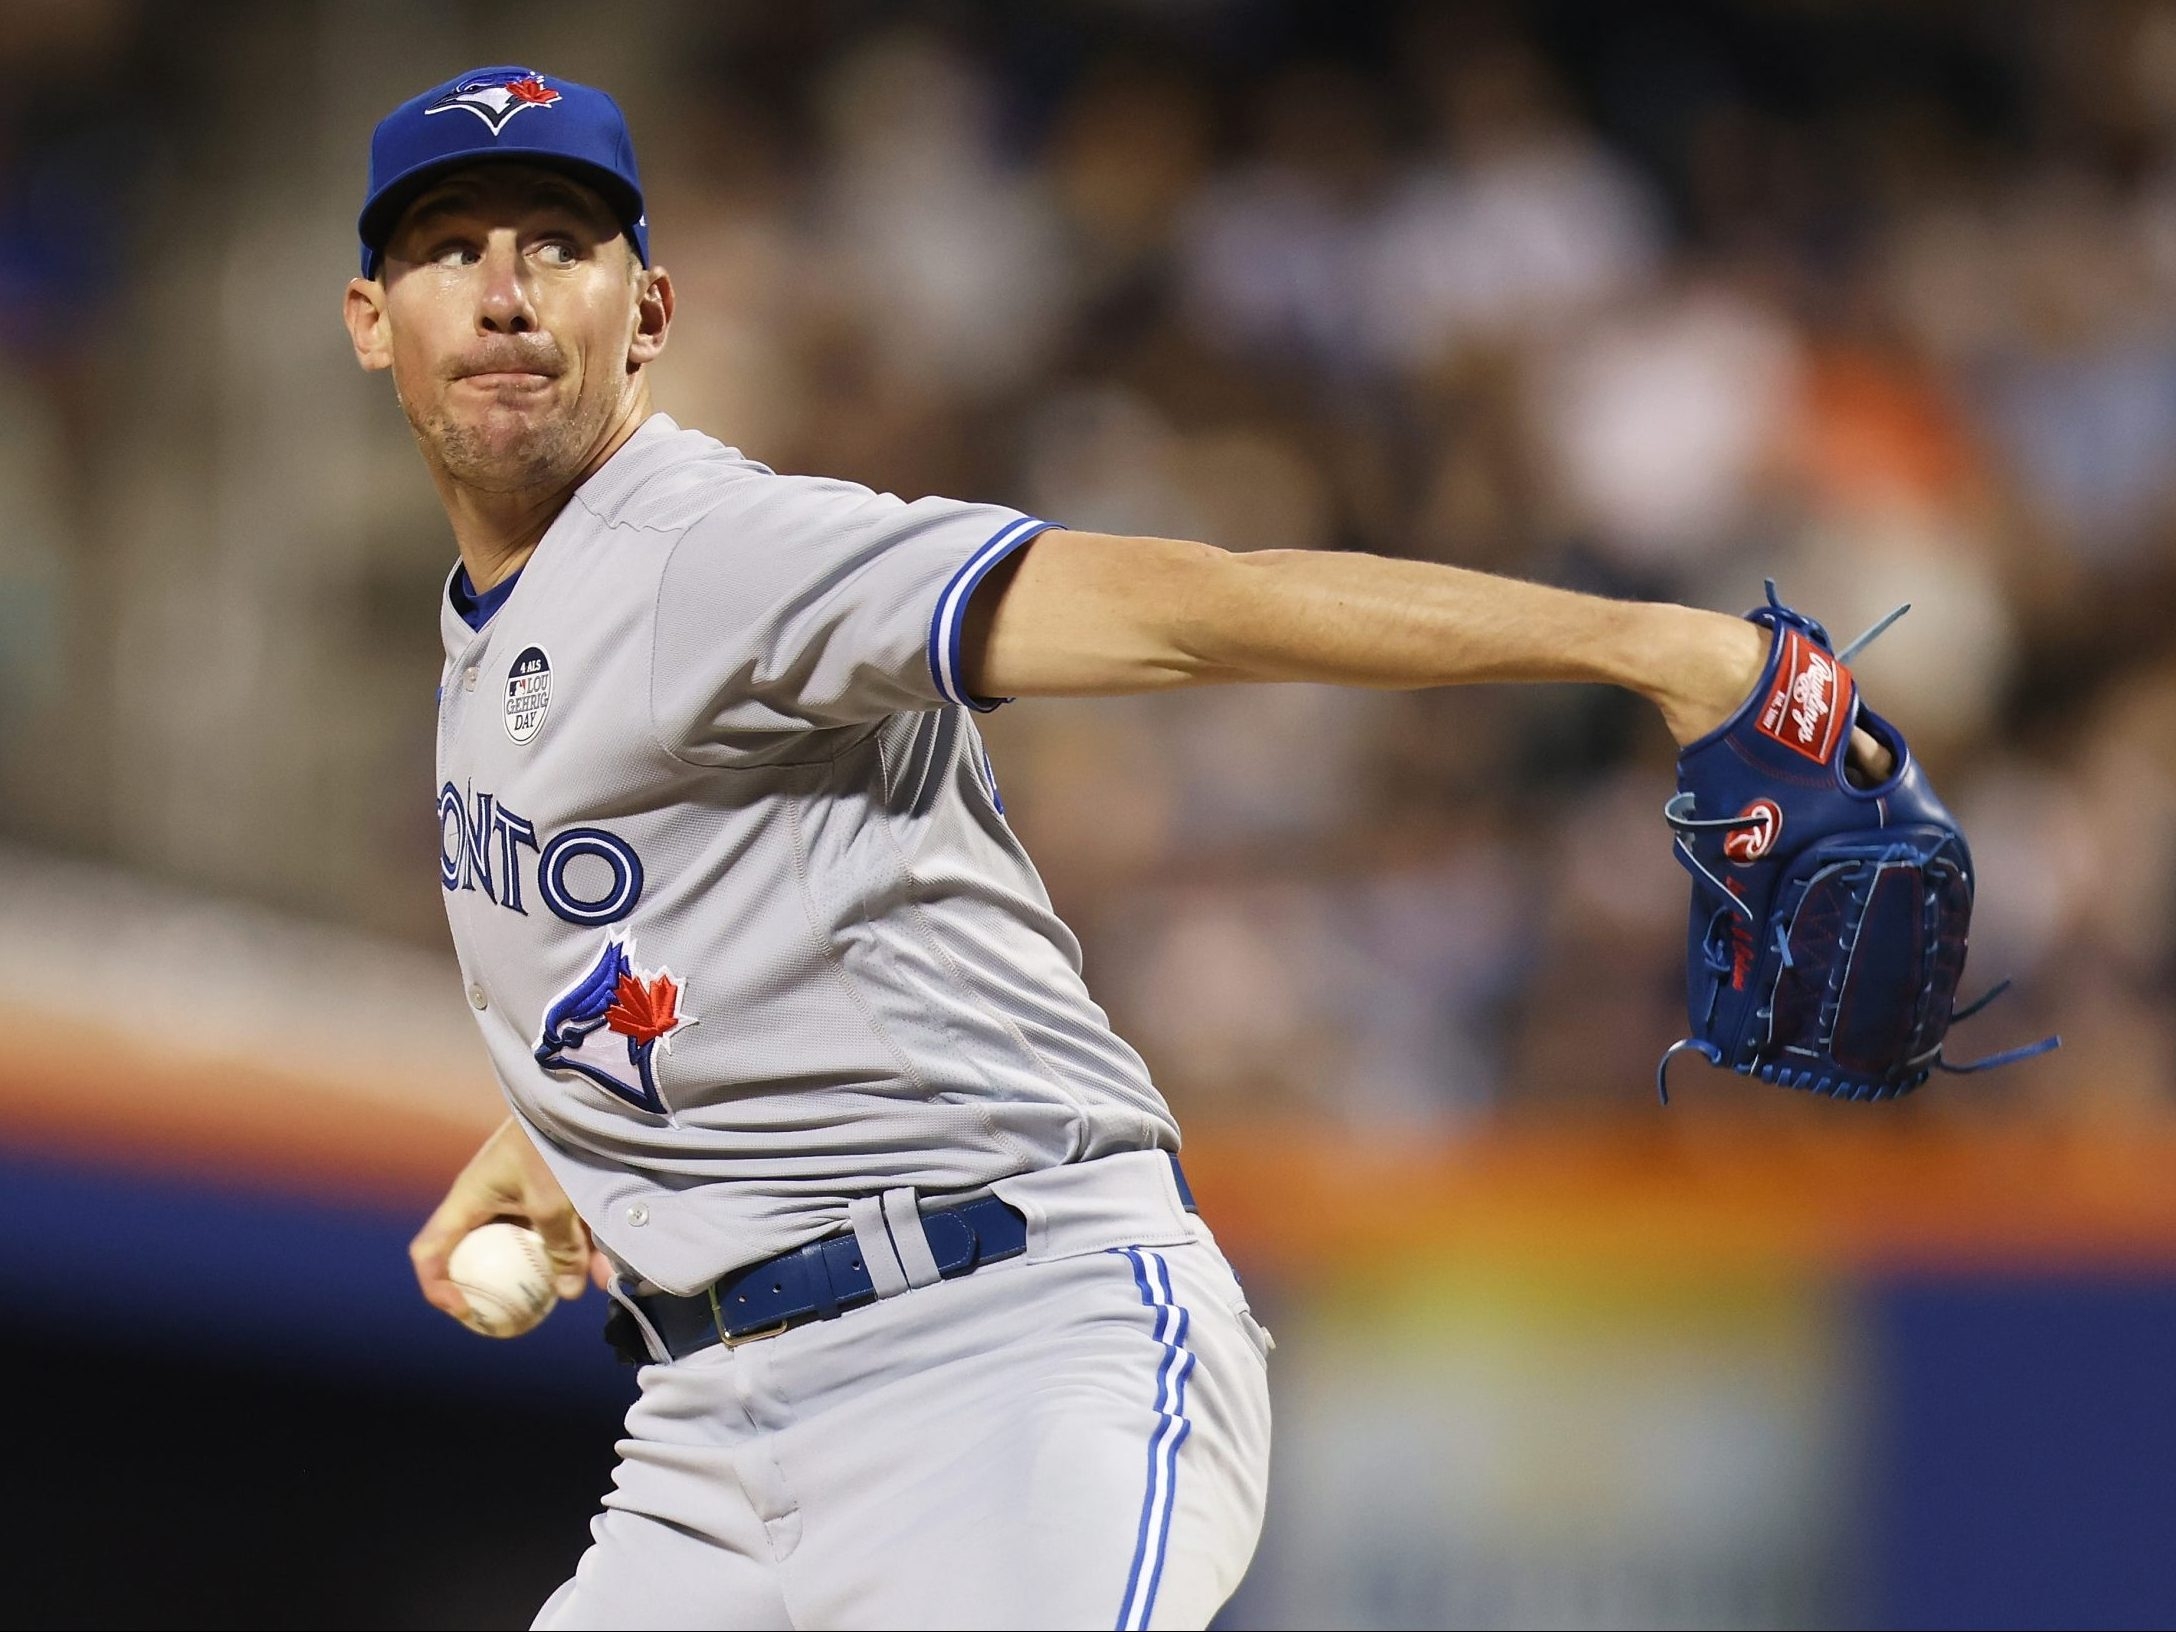 Oh baby: Winning weekend completed for Blue Jays Chris Bassitt